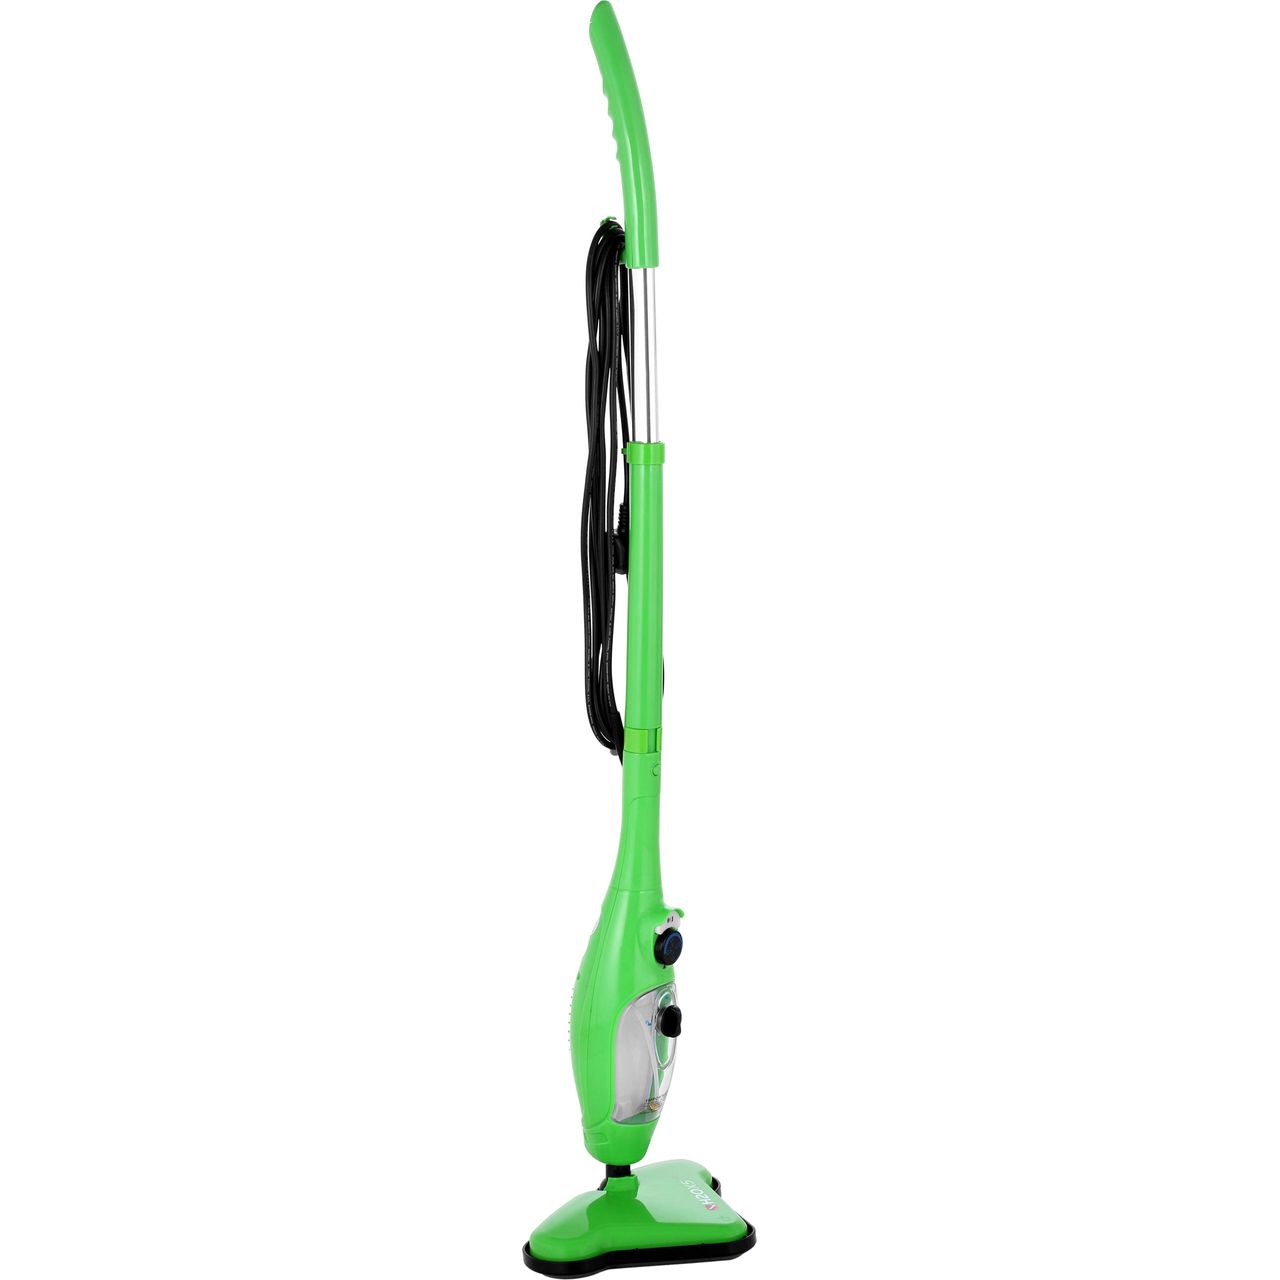 H2O X5 206129UK Steam Mop with up to 15 Minutes Run Time Review